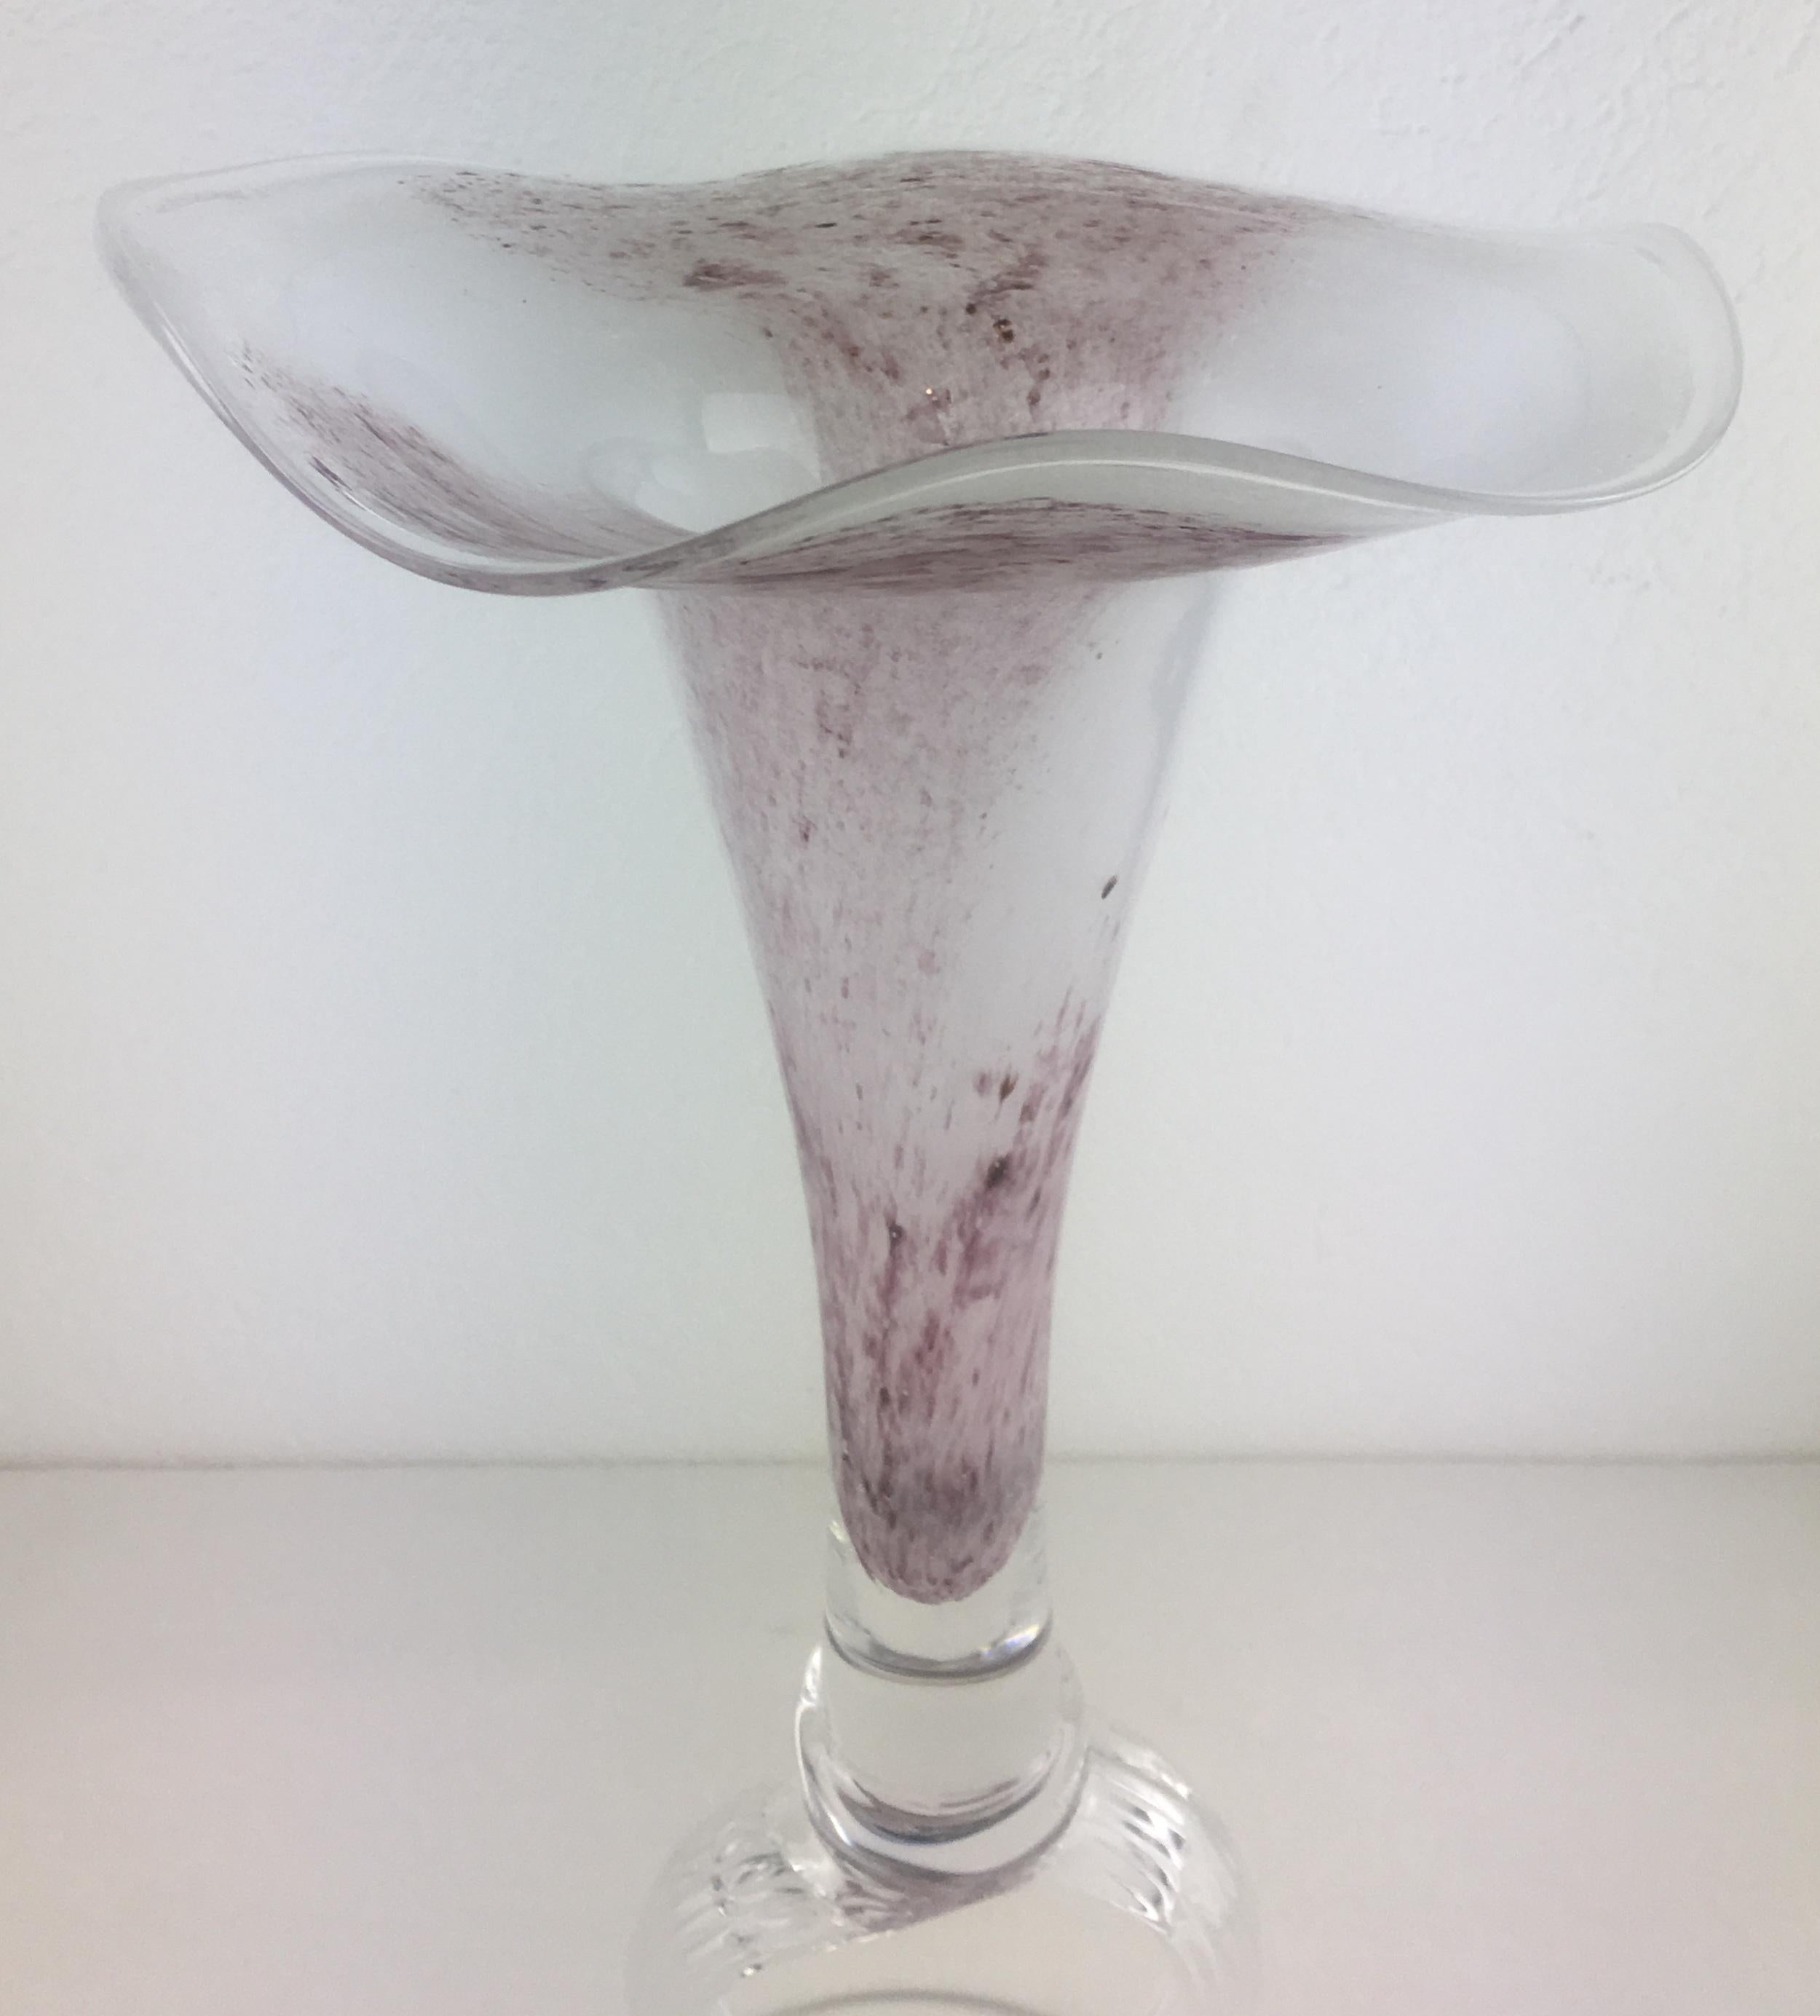 A very decorative centerpiece or Epergne (pronounced E-purn) handcrafted in Biot, France. Beautiful and not often found in this striking rose and clear color, hand blown art glass with signature controlled bubble base created by master glass blowers